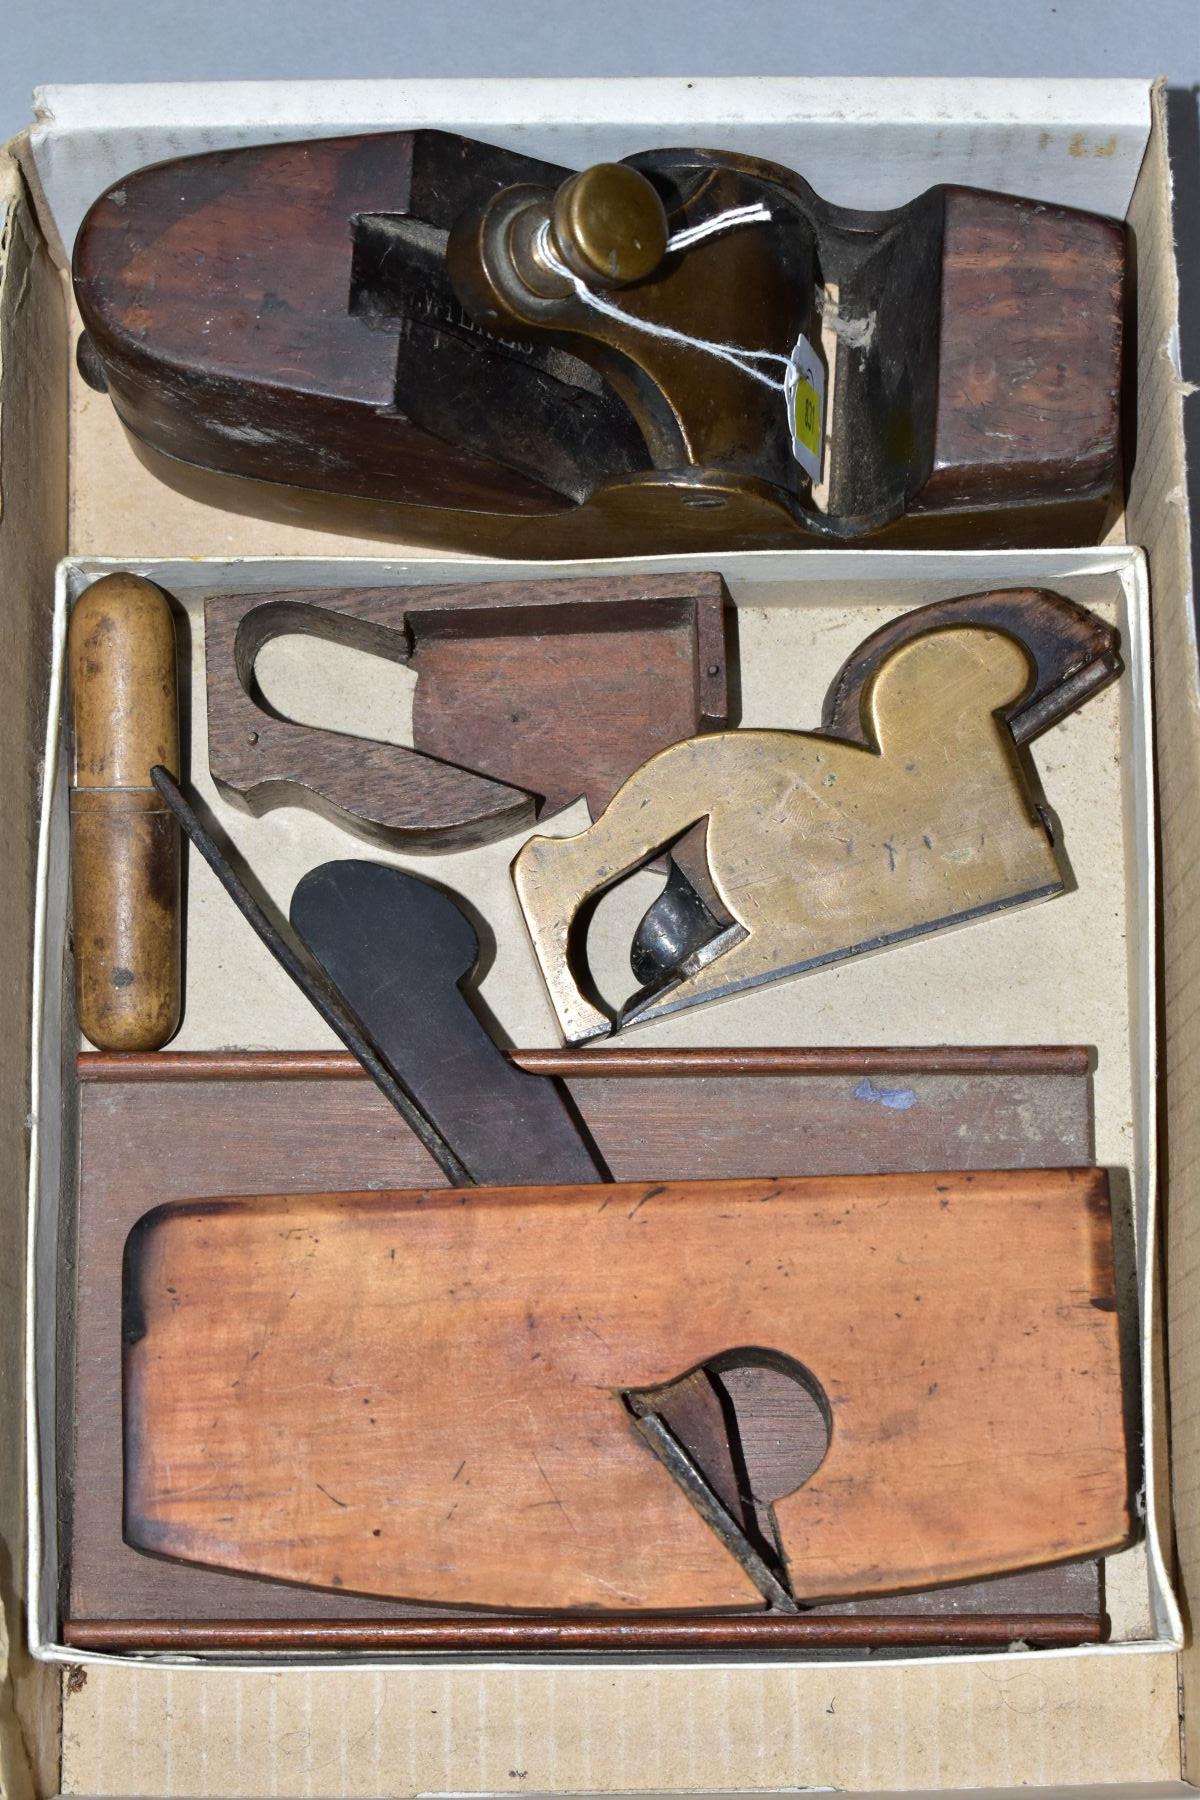 A BOX CONTAINING THREE VINTAGE PLANES AND OTHER TOOLS, including a compassed coopers plane, 1 1/